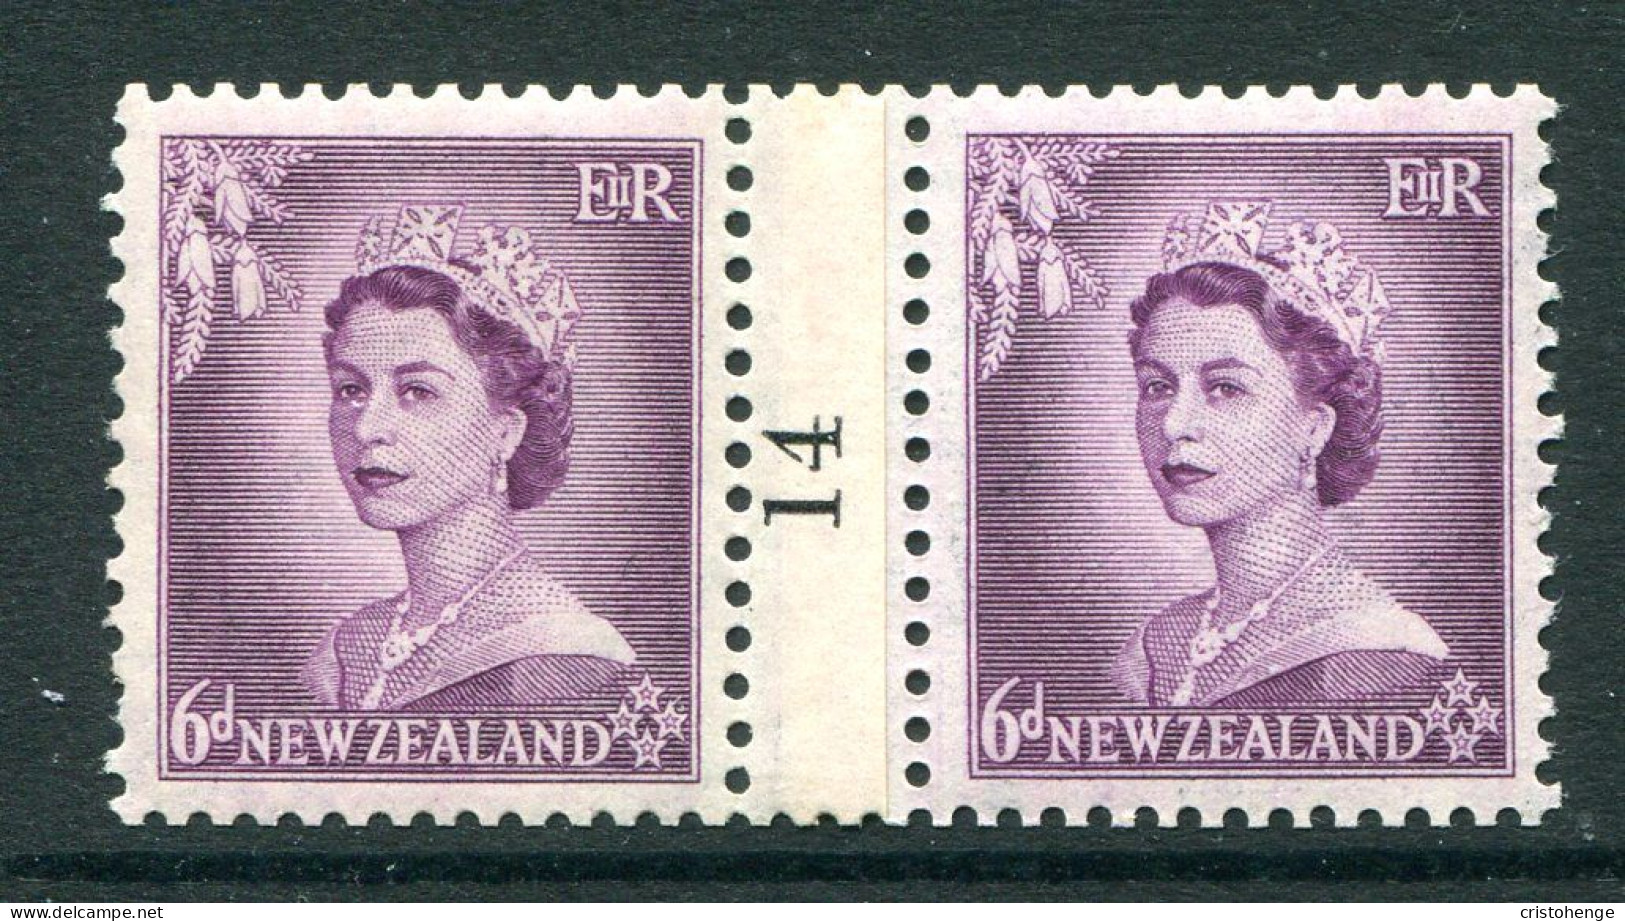 New Zealand 1953-59 QEII Definitives - Coil Pairs - 6d Purple - No. 14 - LHM (SG Unlisted) - Neufs